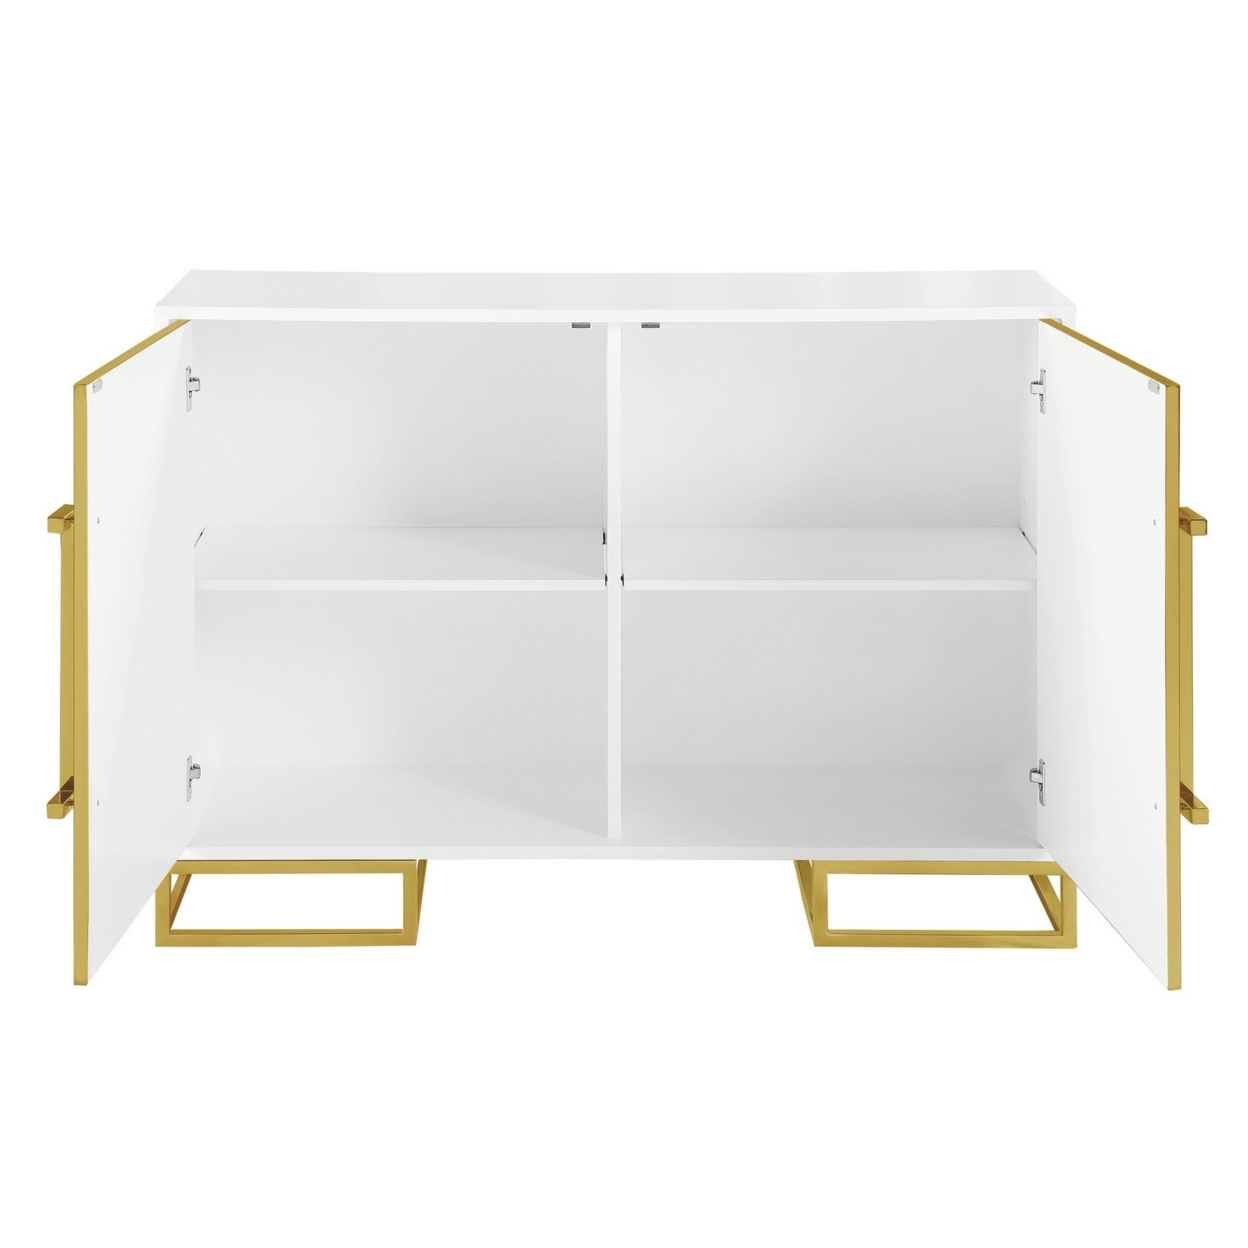 48 Inch Wood Accent Cabinet With 2 Doors And Square Open Base, White, Gold- Saltoro Sherpi